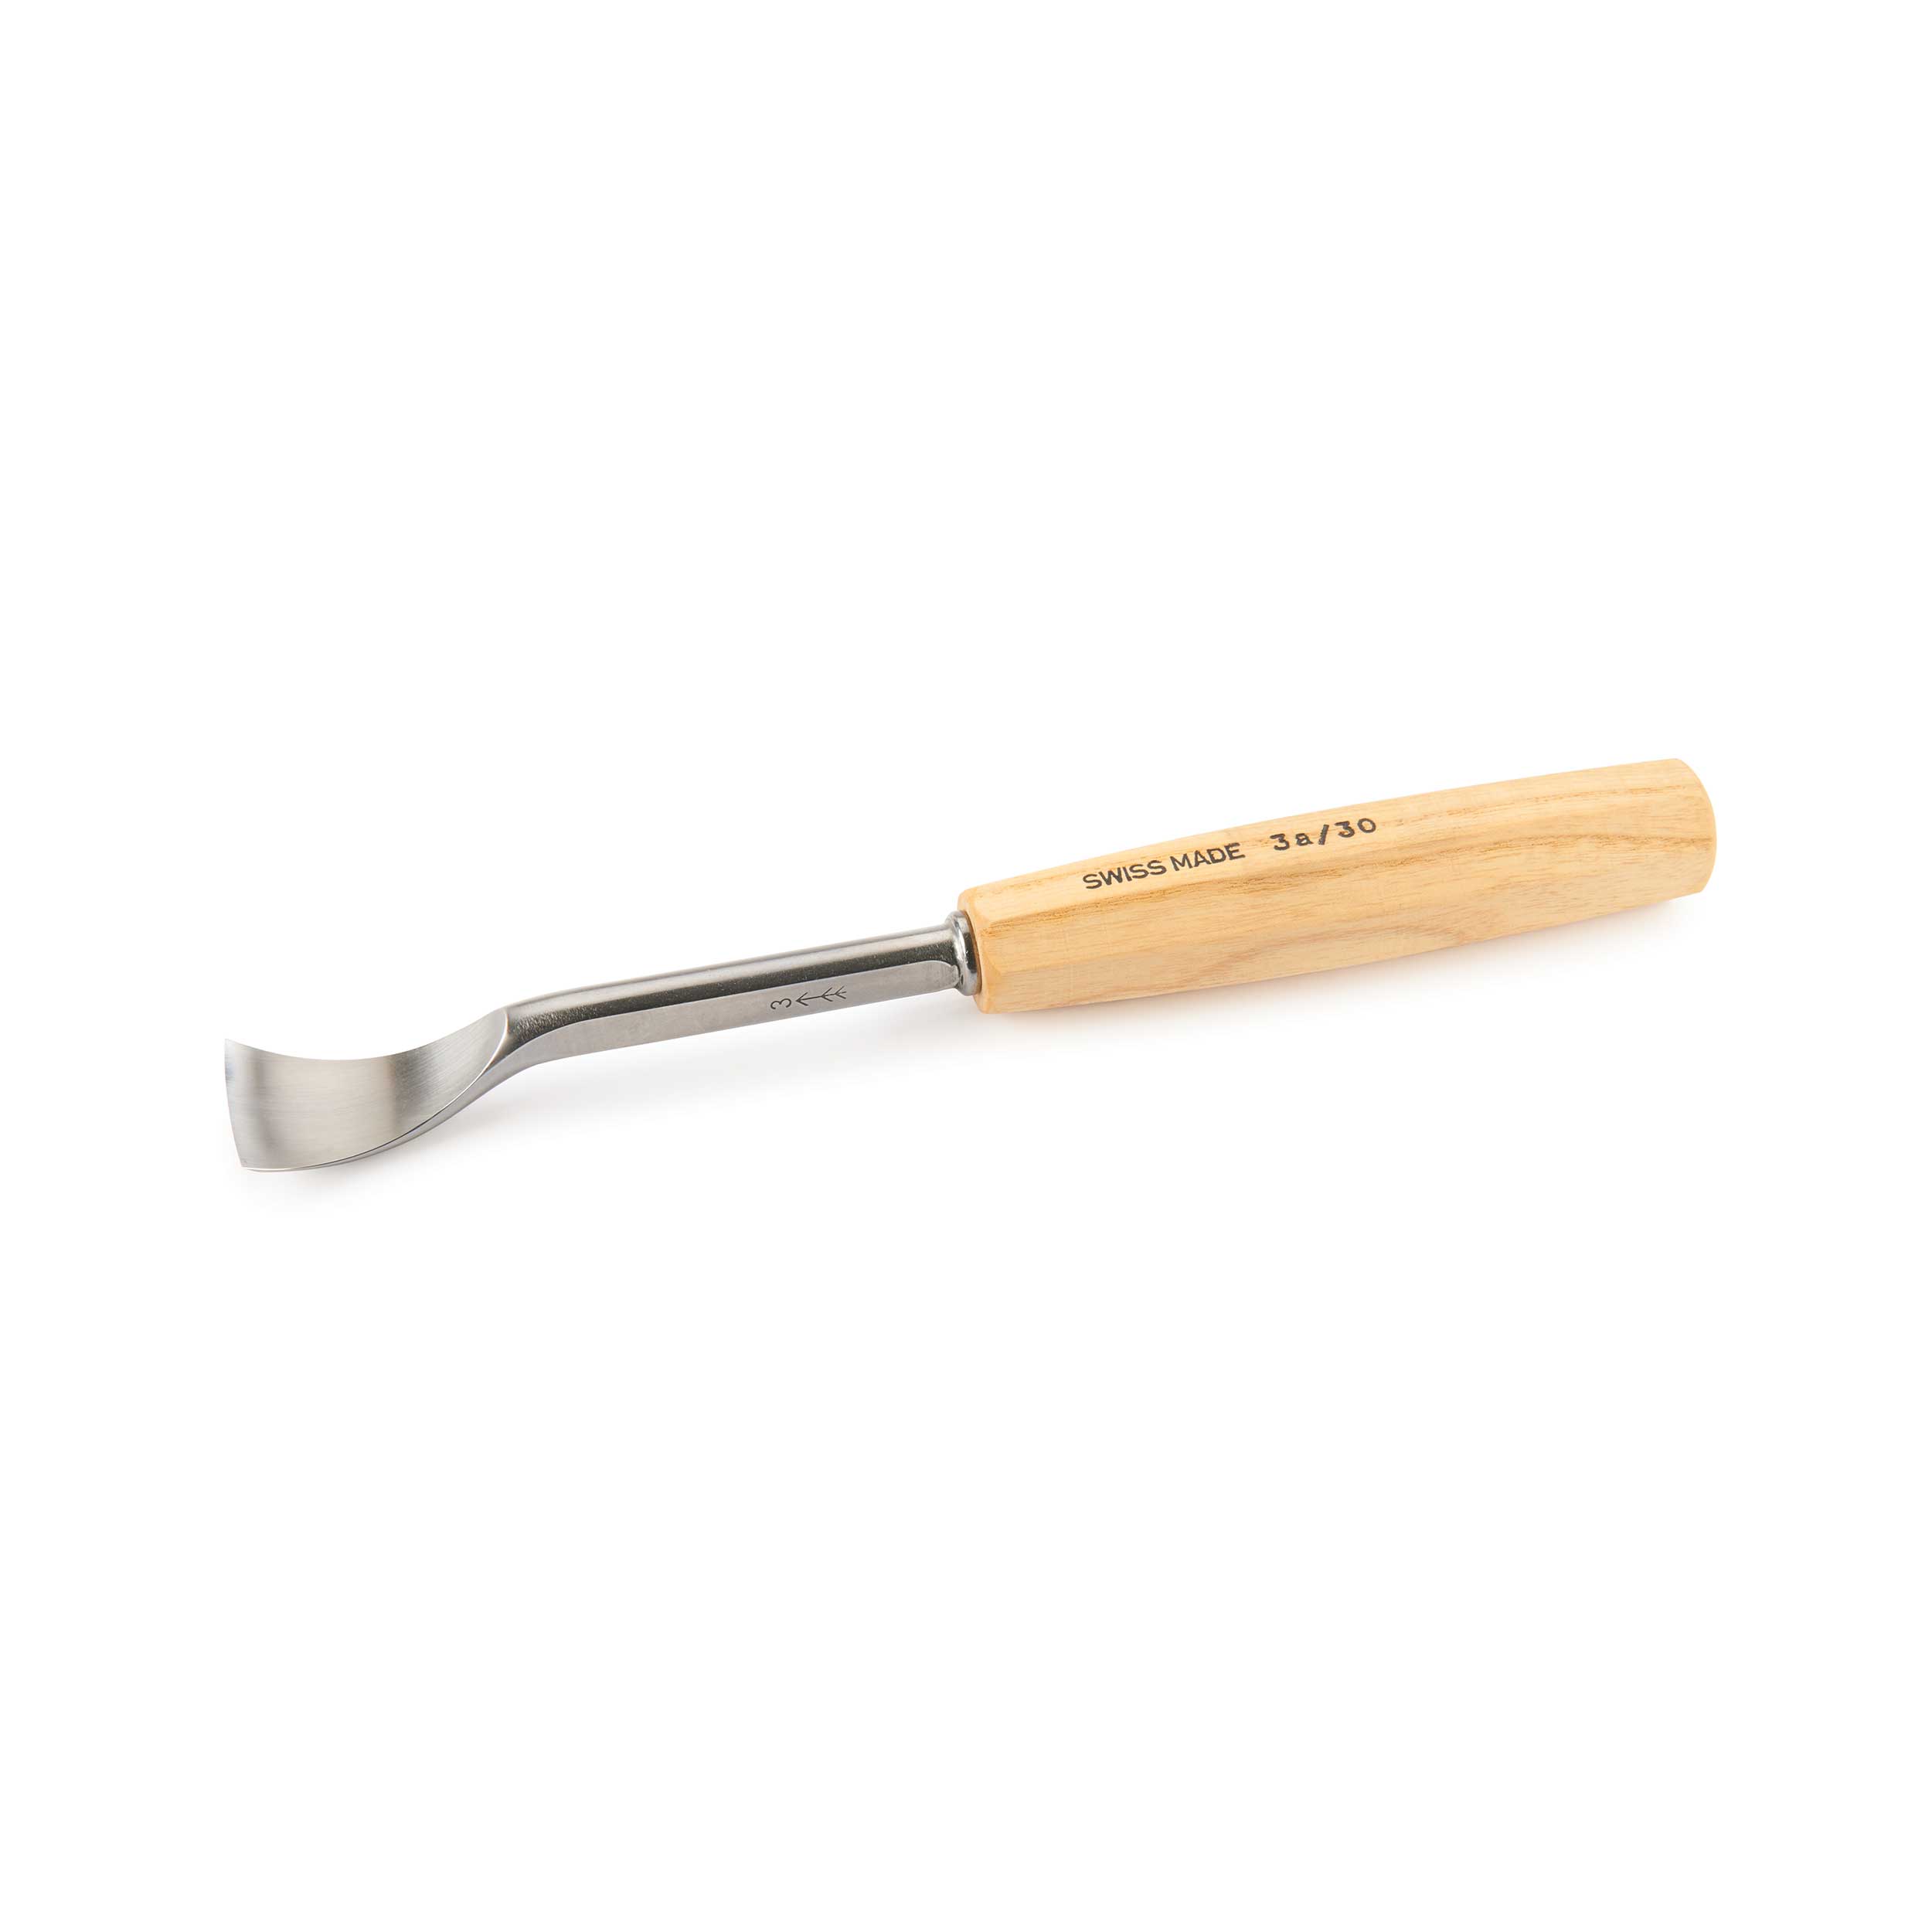 #3 Sweep Spoon Gouge 30 Mm, Full Size